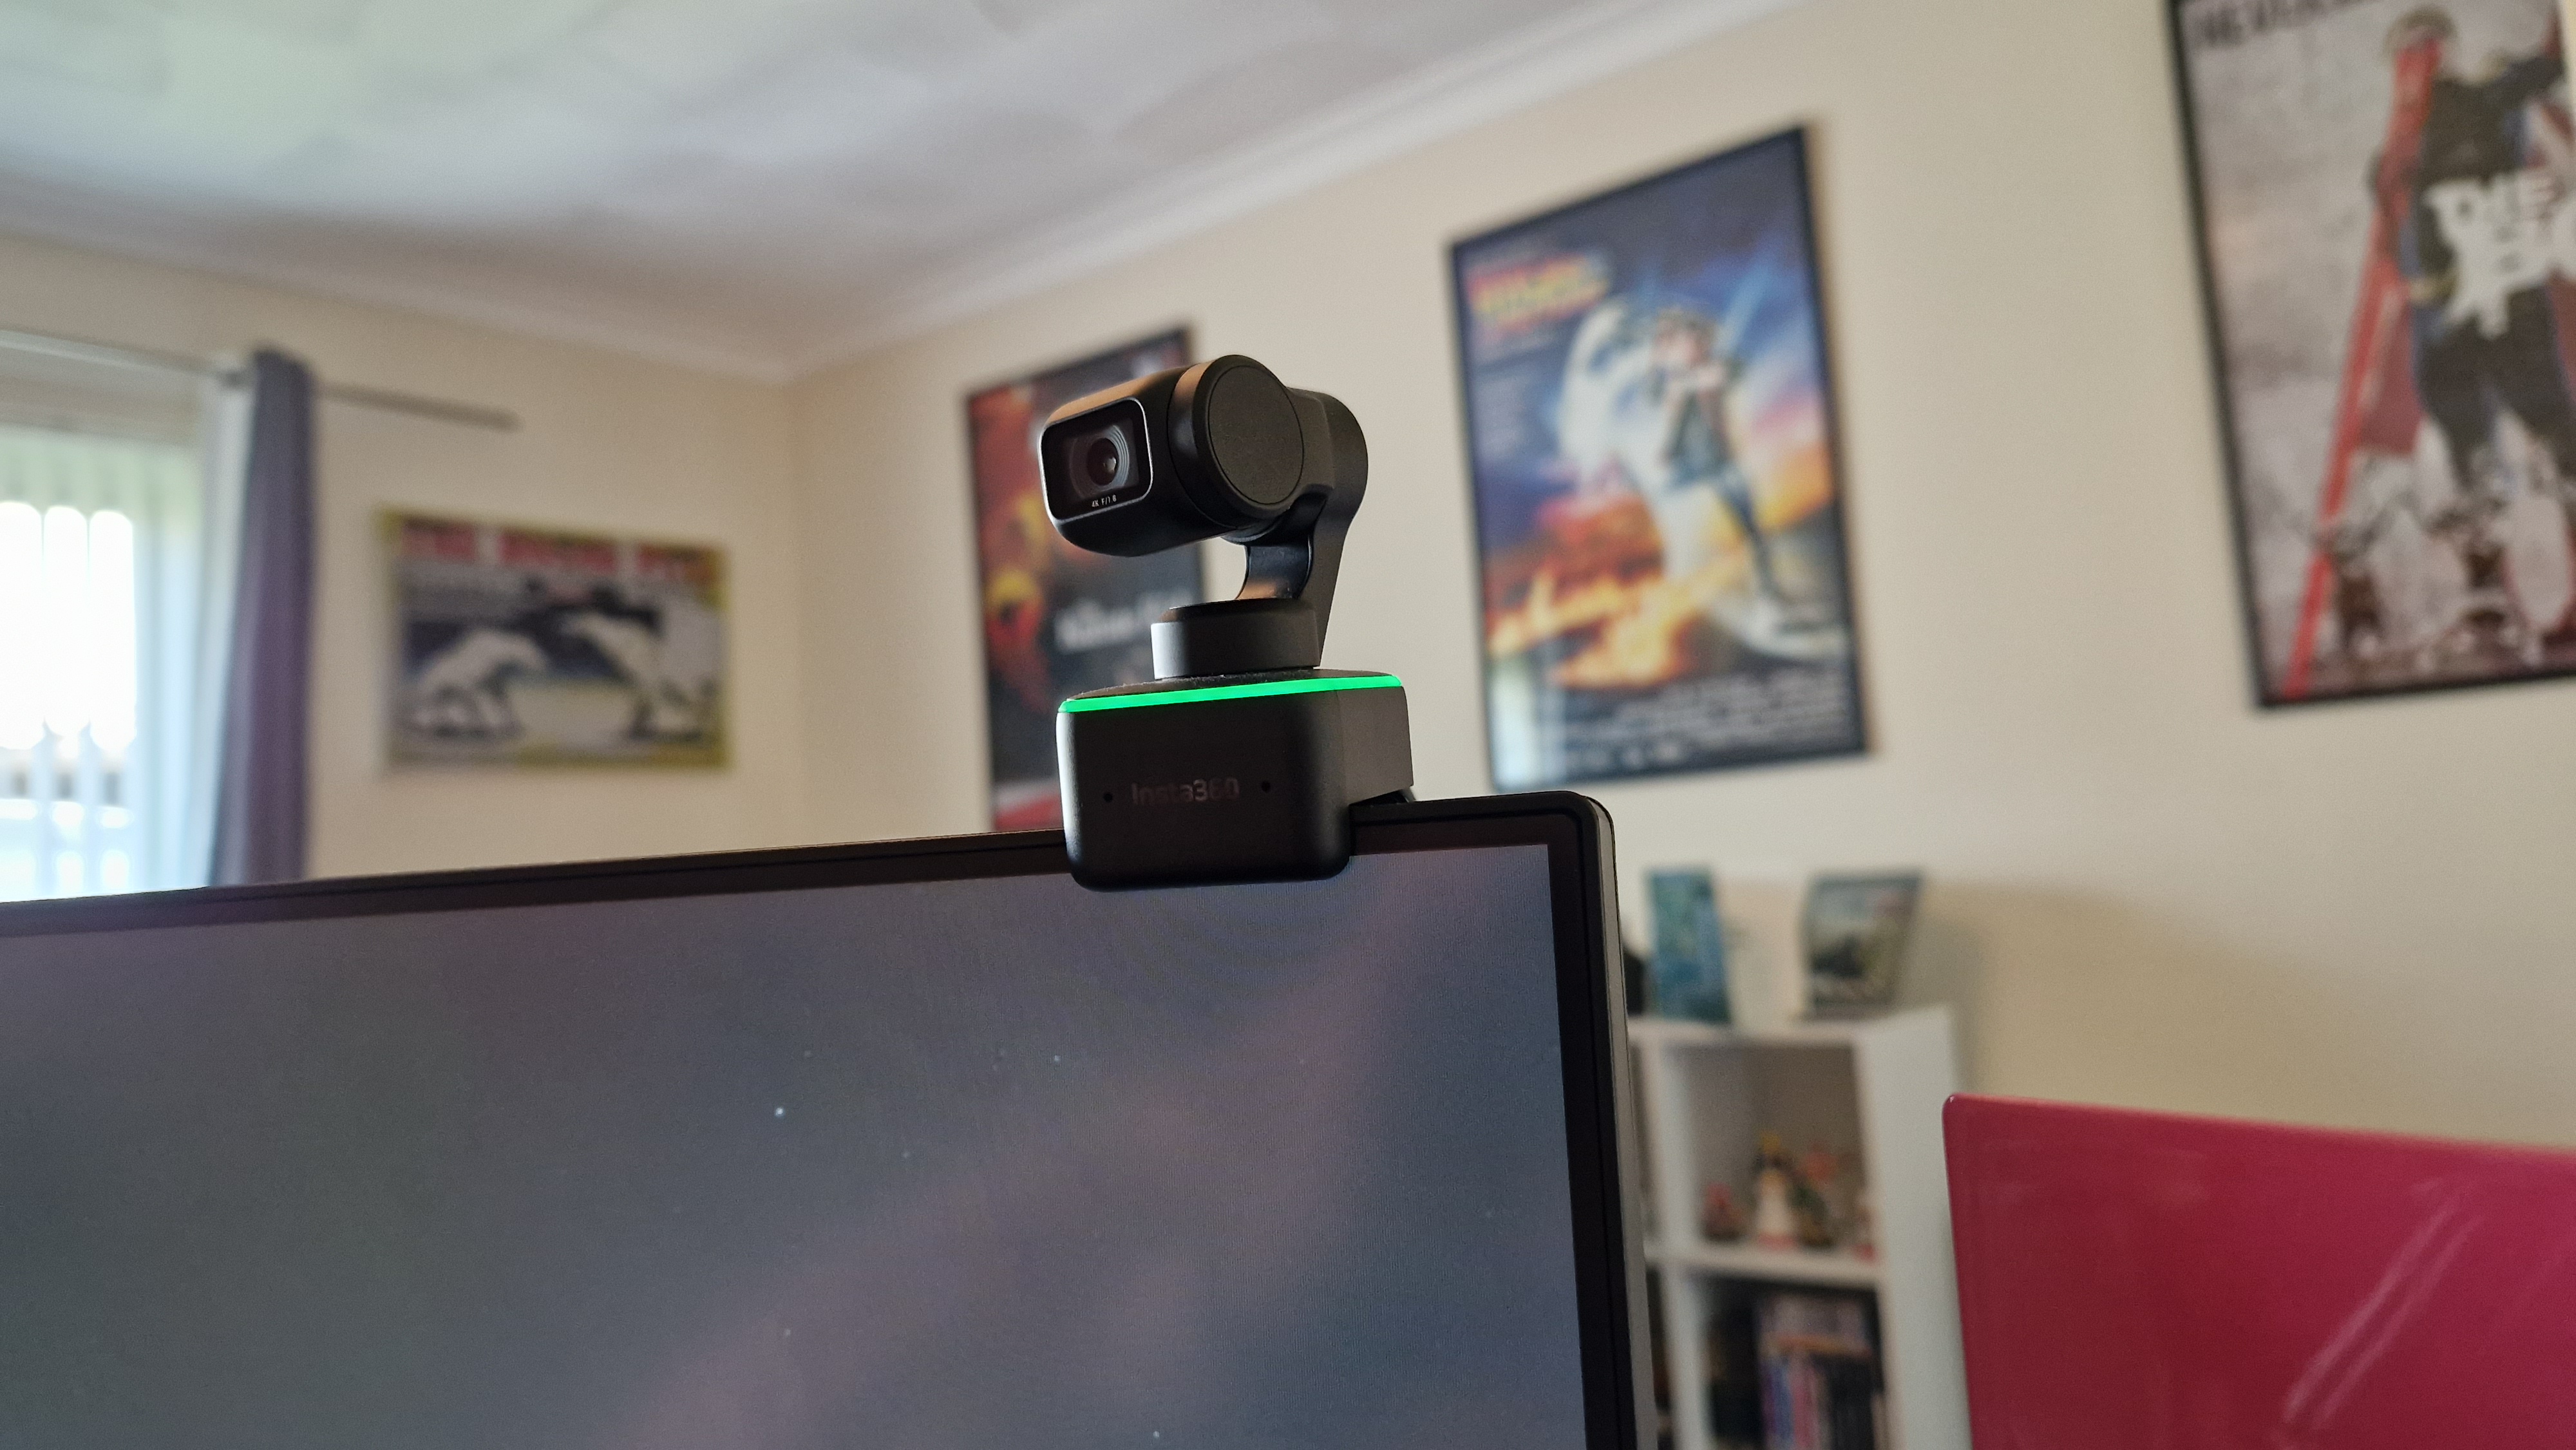 Insta360 Link review: one of the most intelligent 4K webcams out there